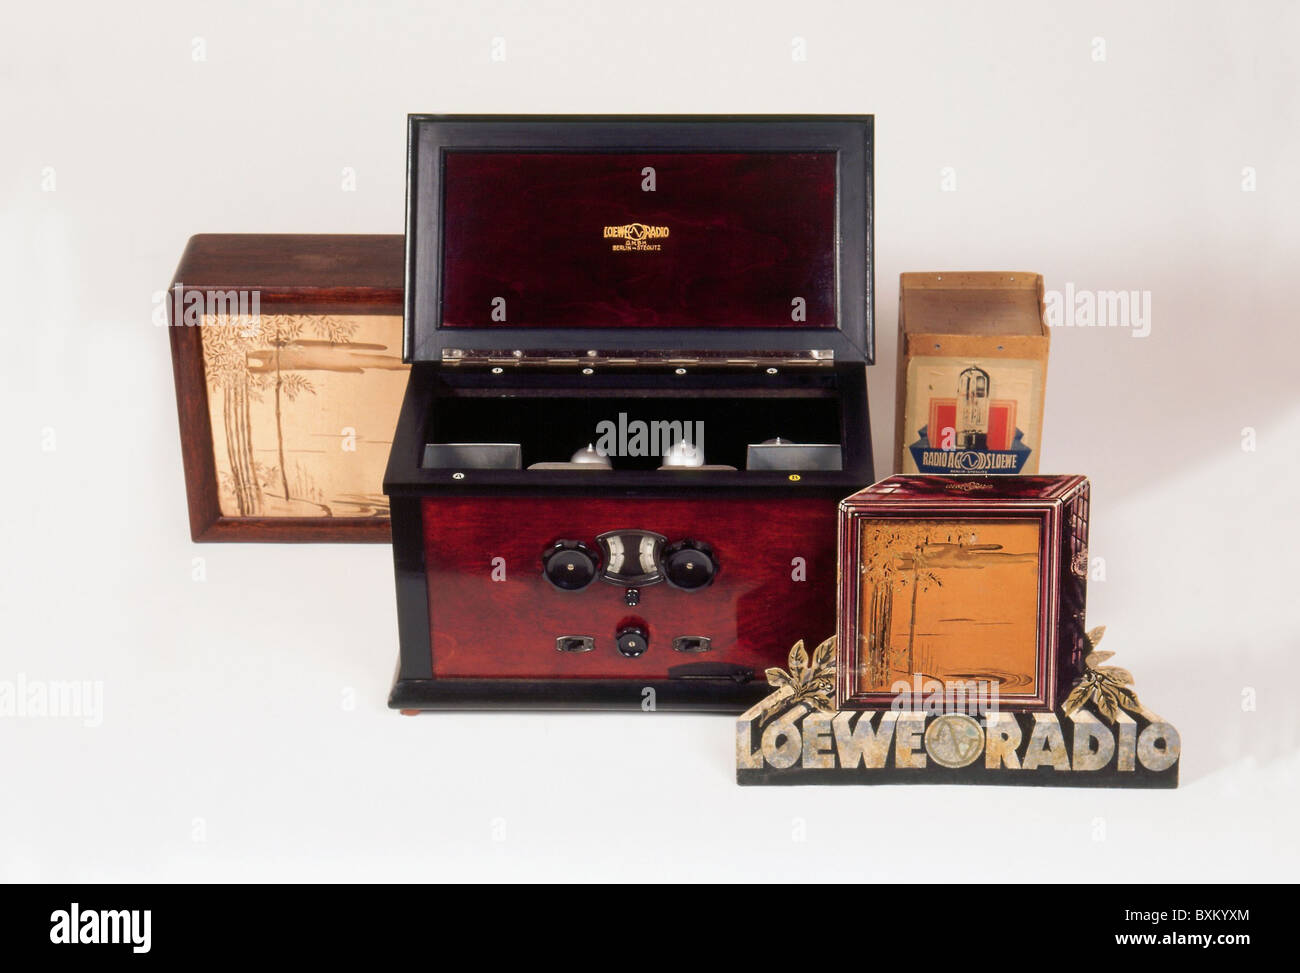 broadcast, radio, radio set Loewe 'FE 63', Germany, 1929/1930, Additional-Rights-Clearences-Not Available Stock Photo